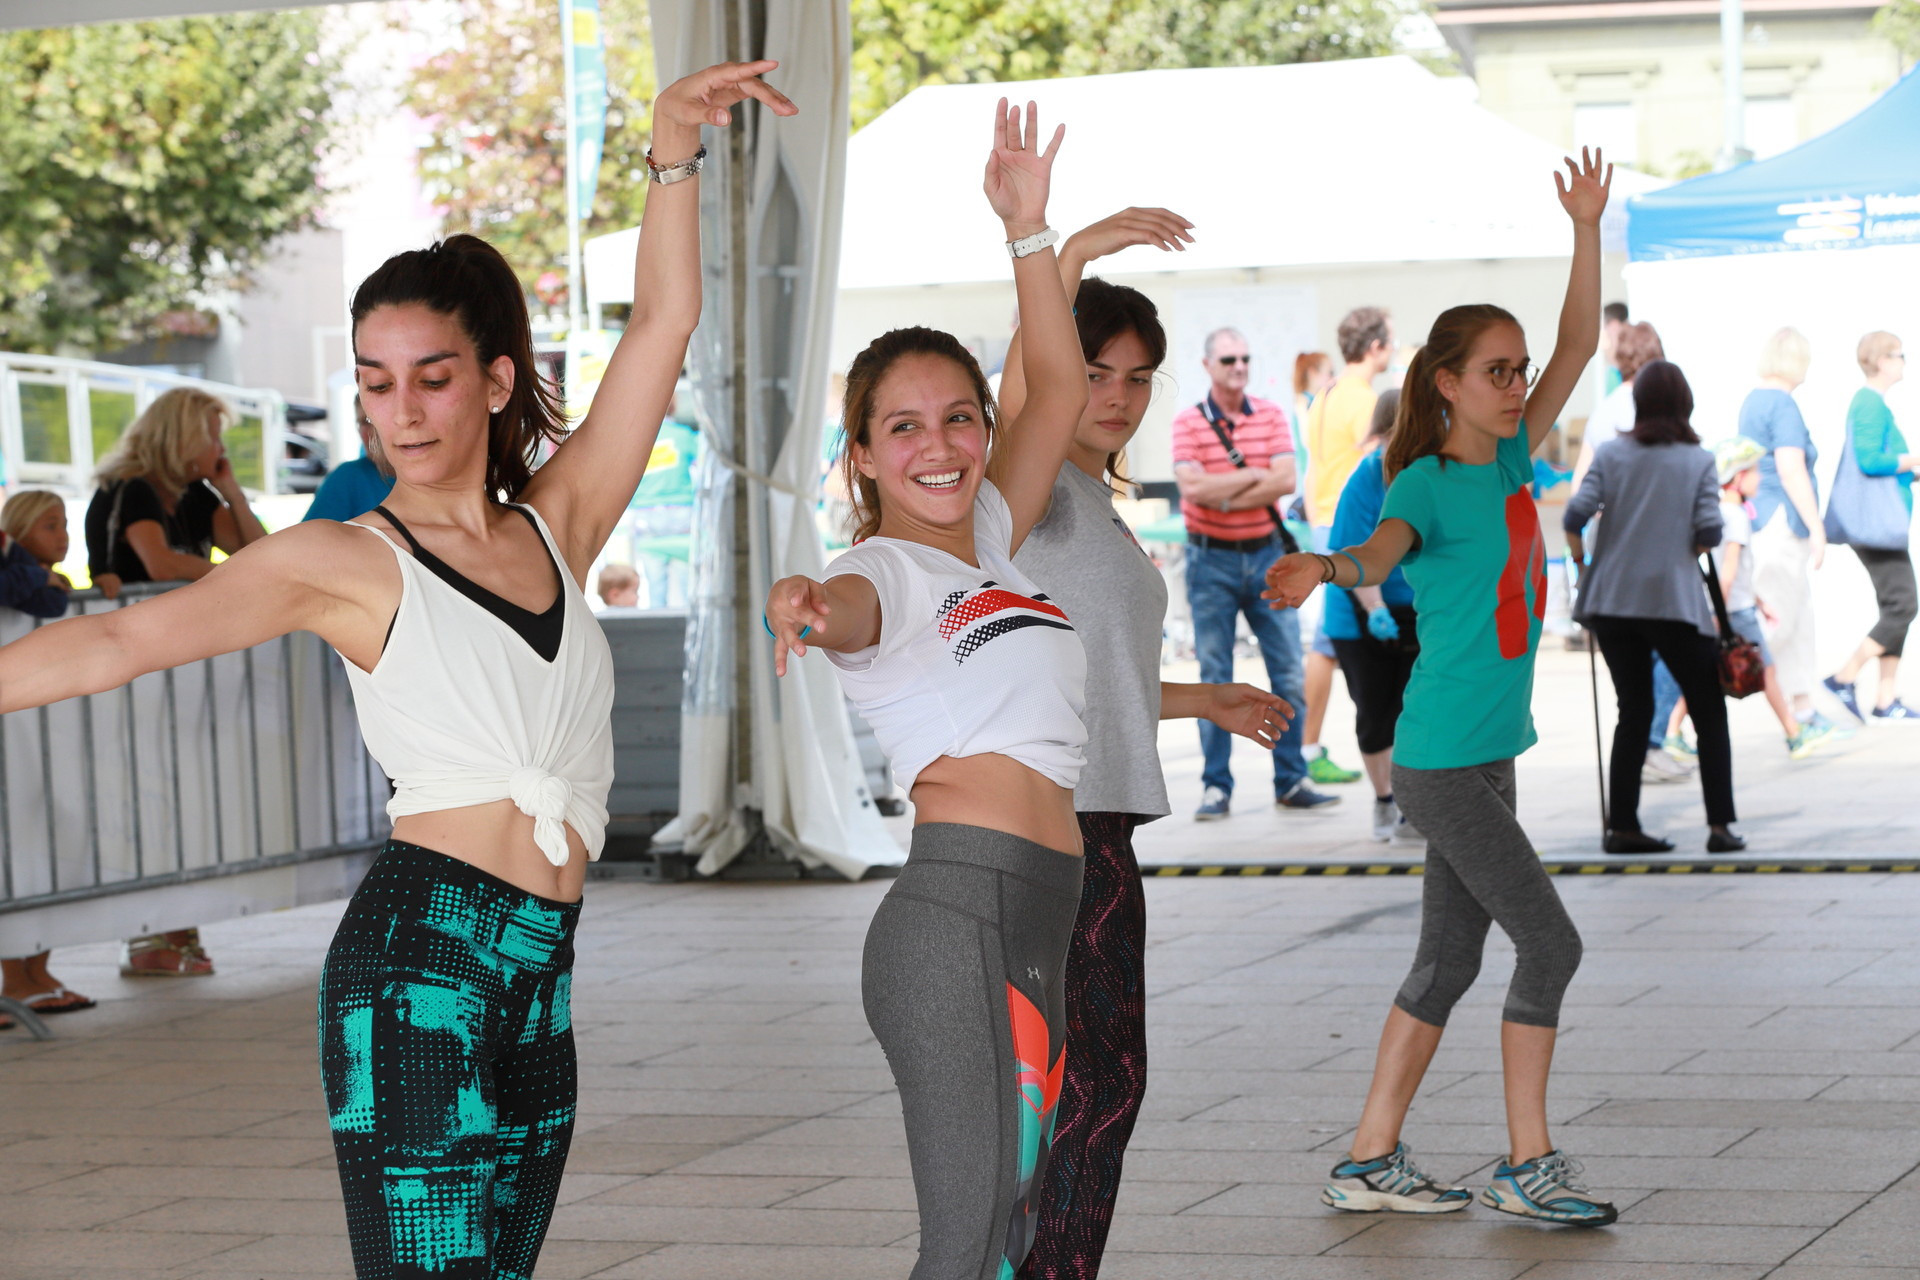 The FISU Healthy Campus project is among the areas that are being focused on as part of the FISU World Forum ©FISU